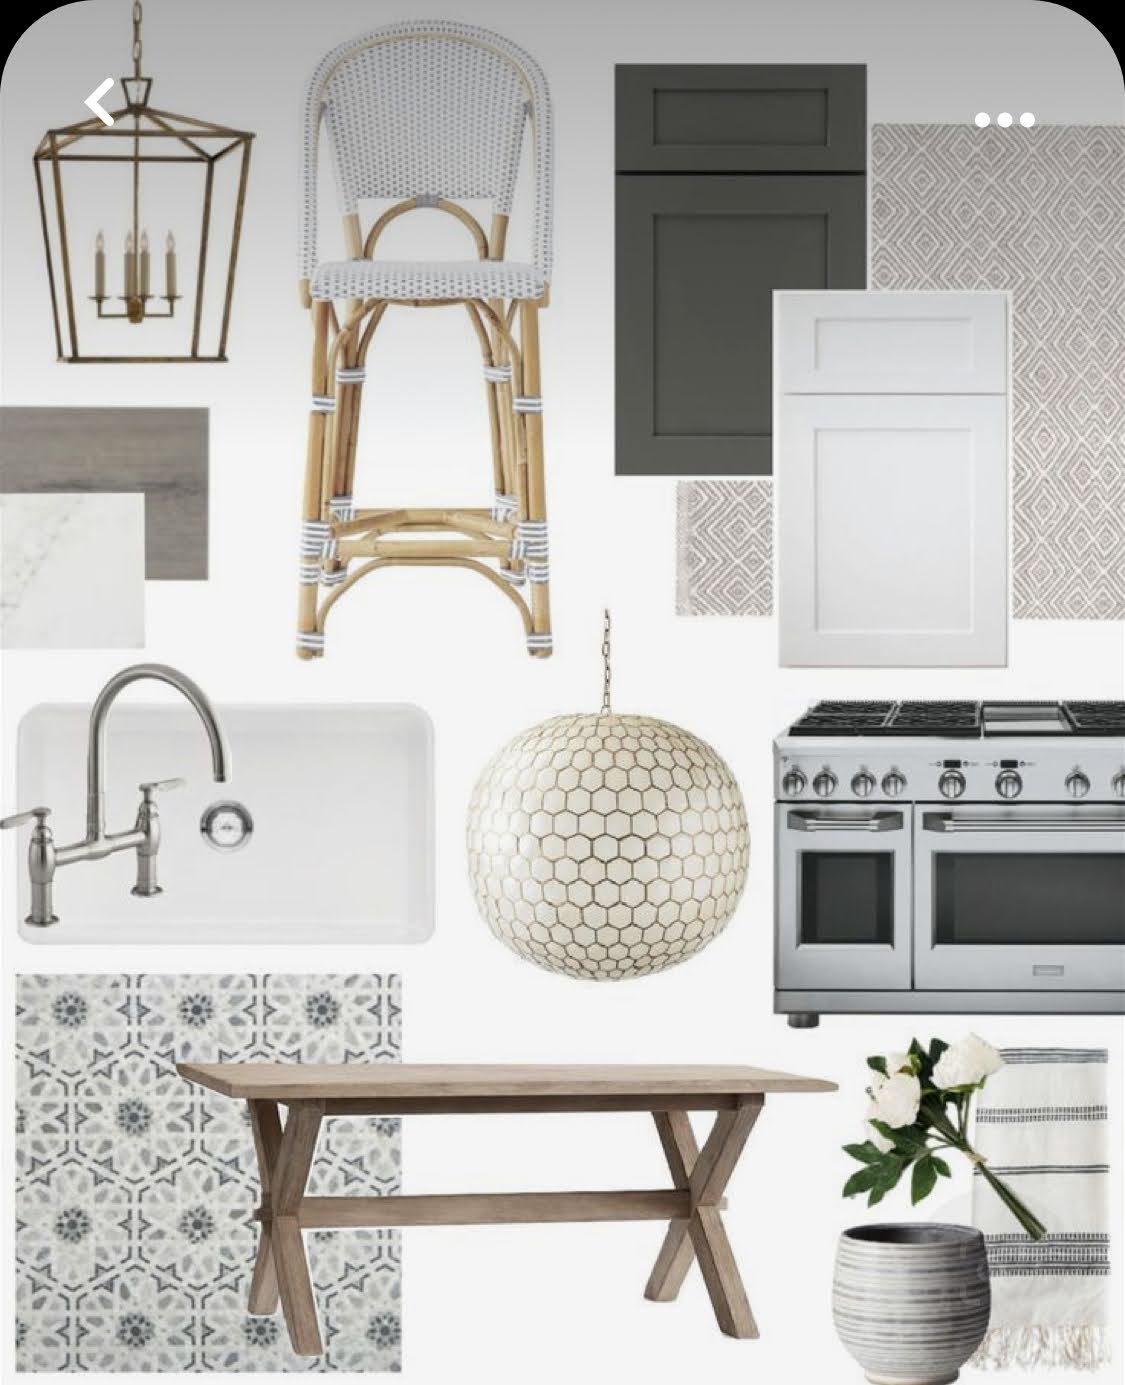 Interior Design Mood Board: Inspiration for Creating a Cohesive and Stylish Kitchen